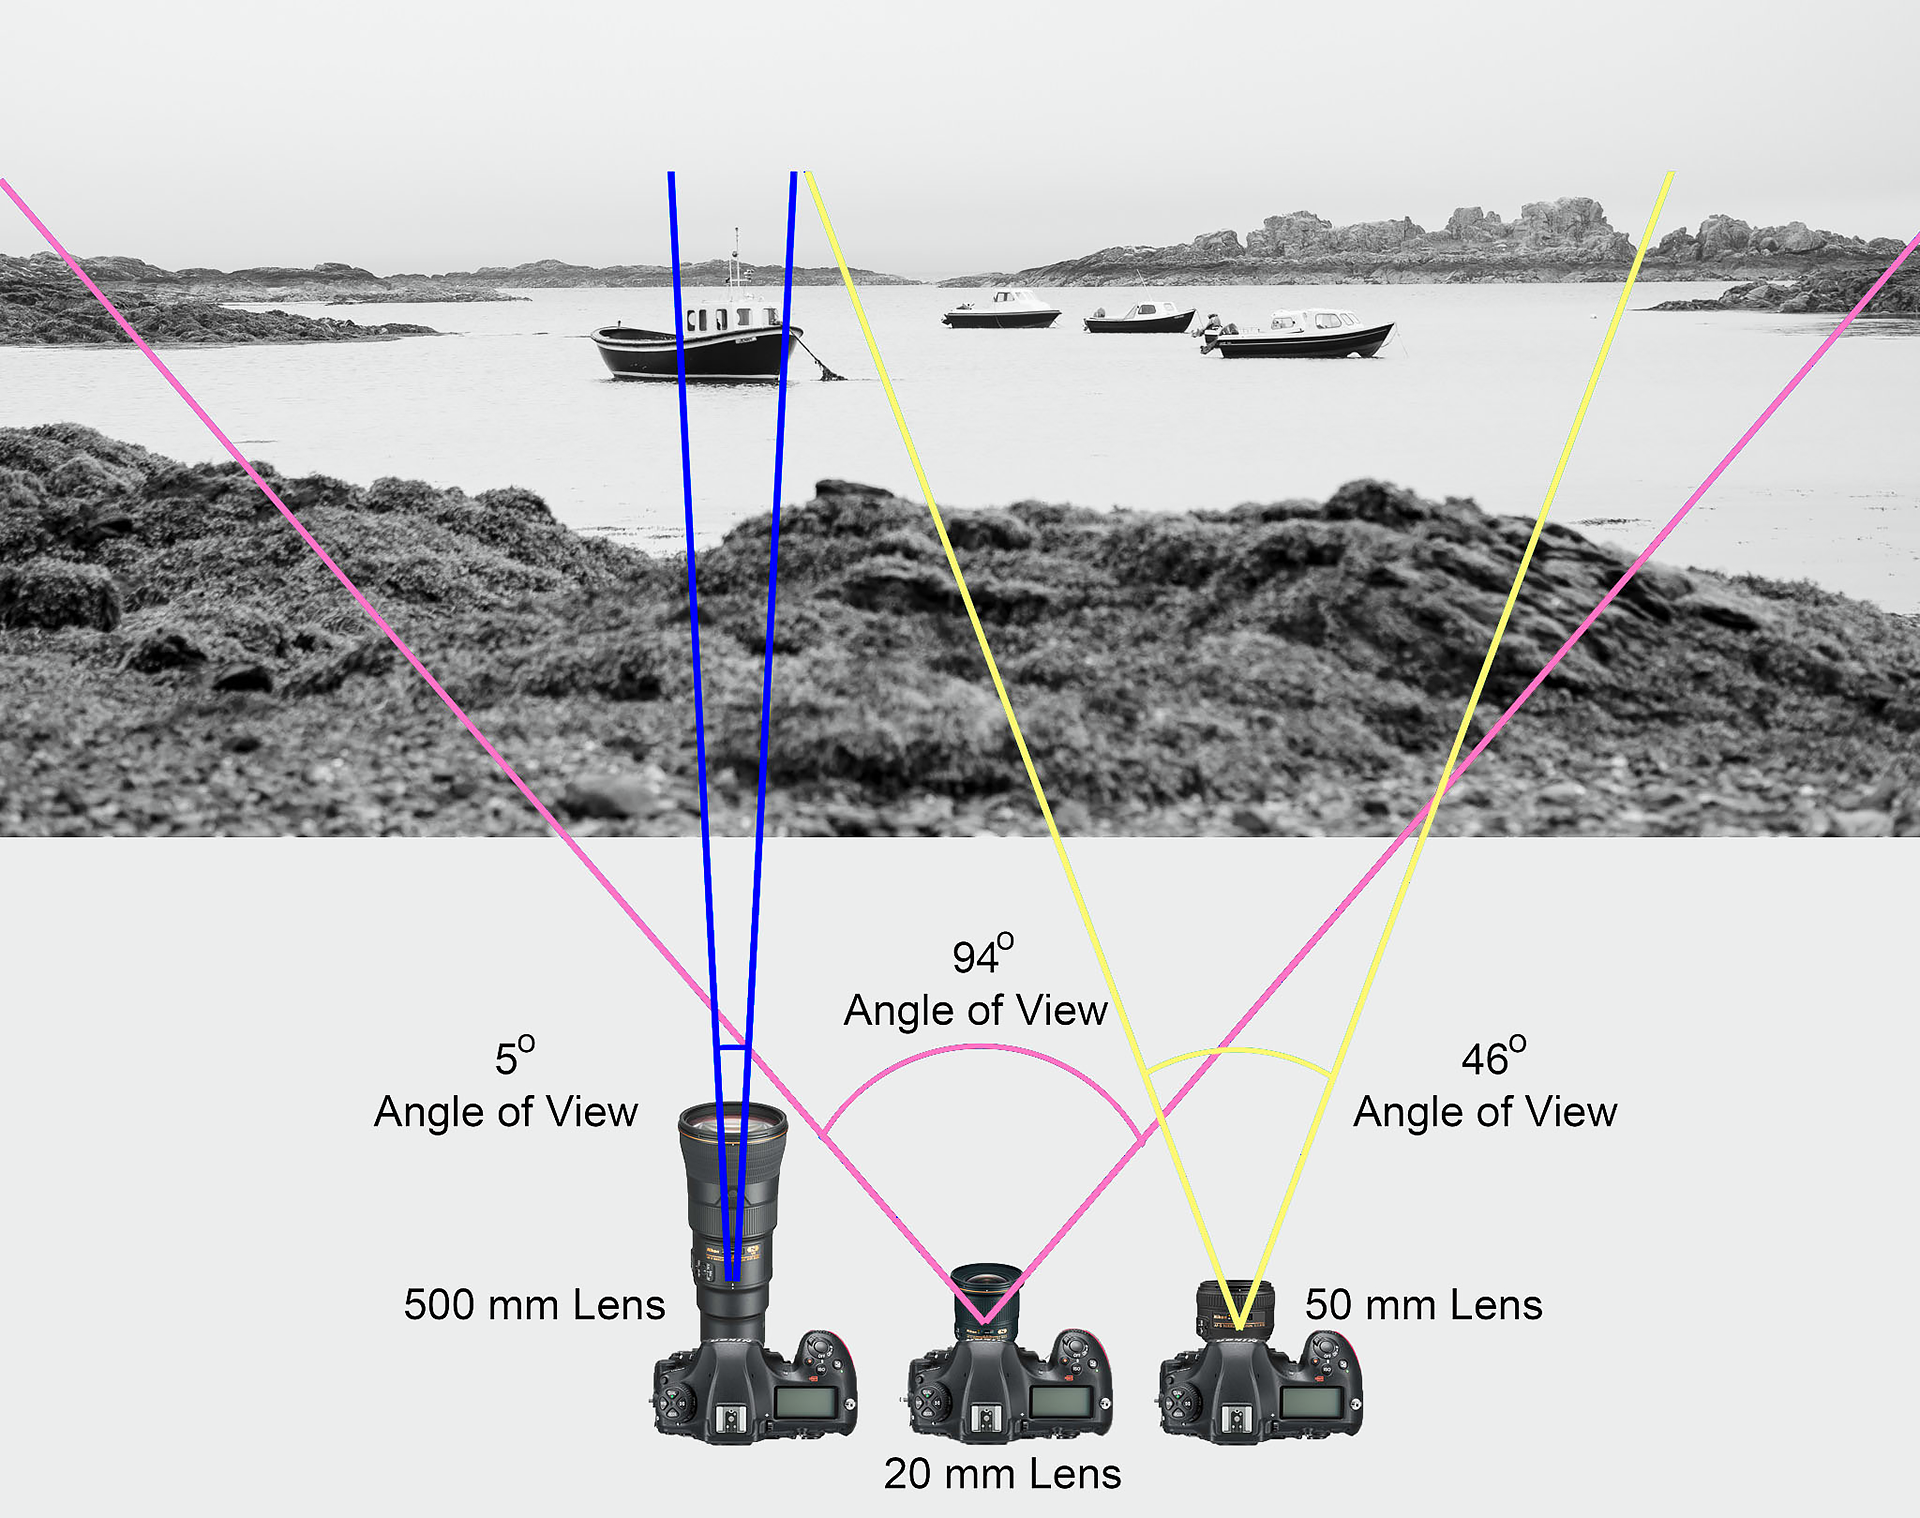 1920x1518px-focal-length-illustration-to-explain-angle-of-view-vWA24